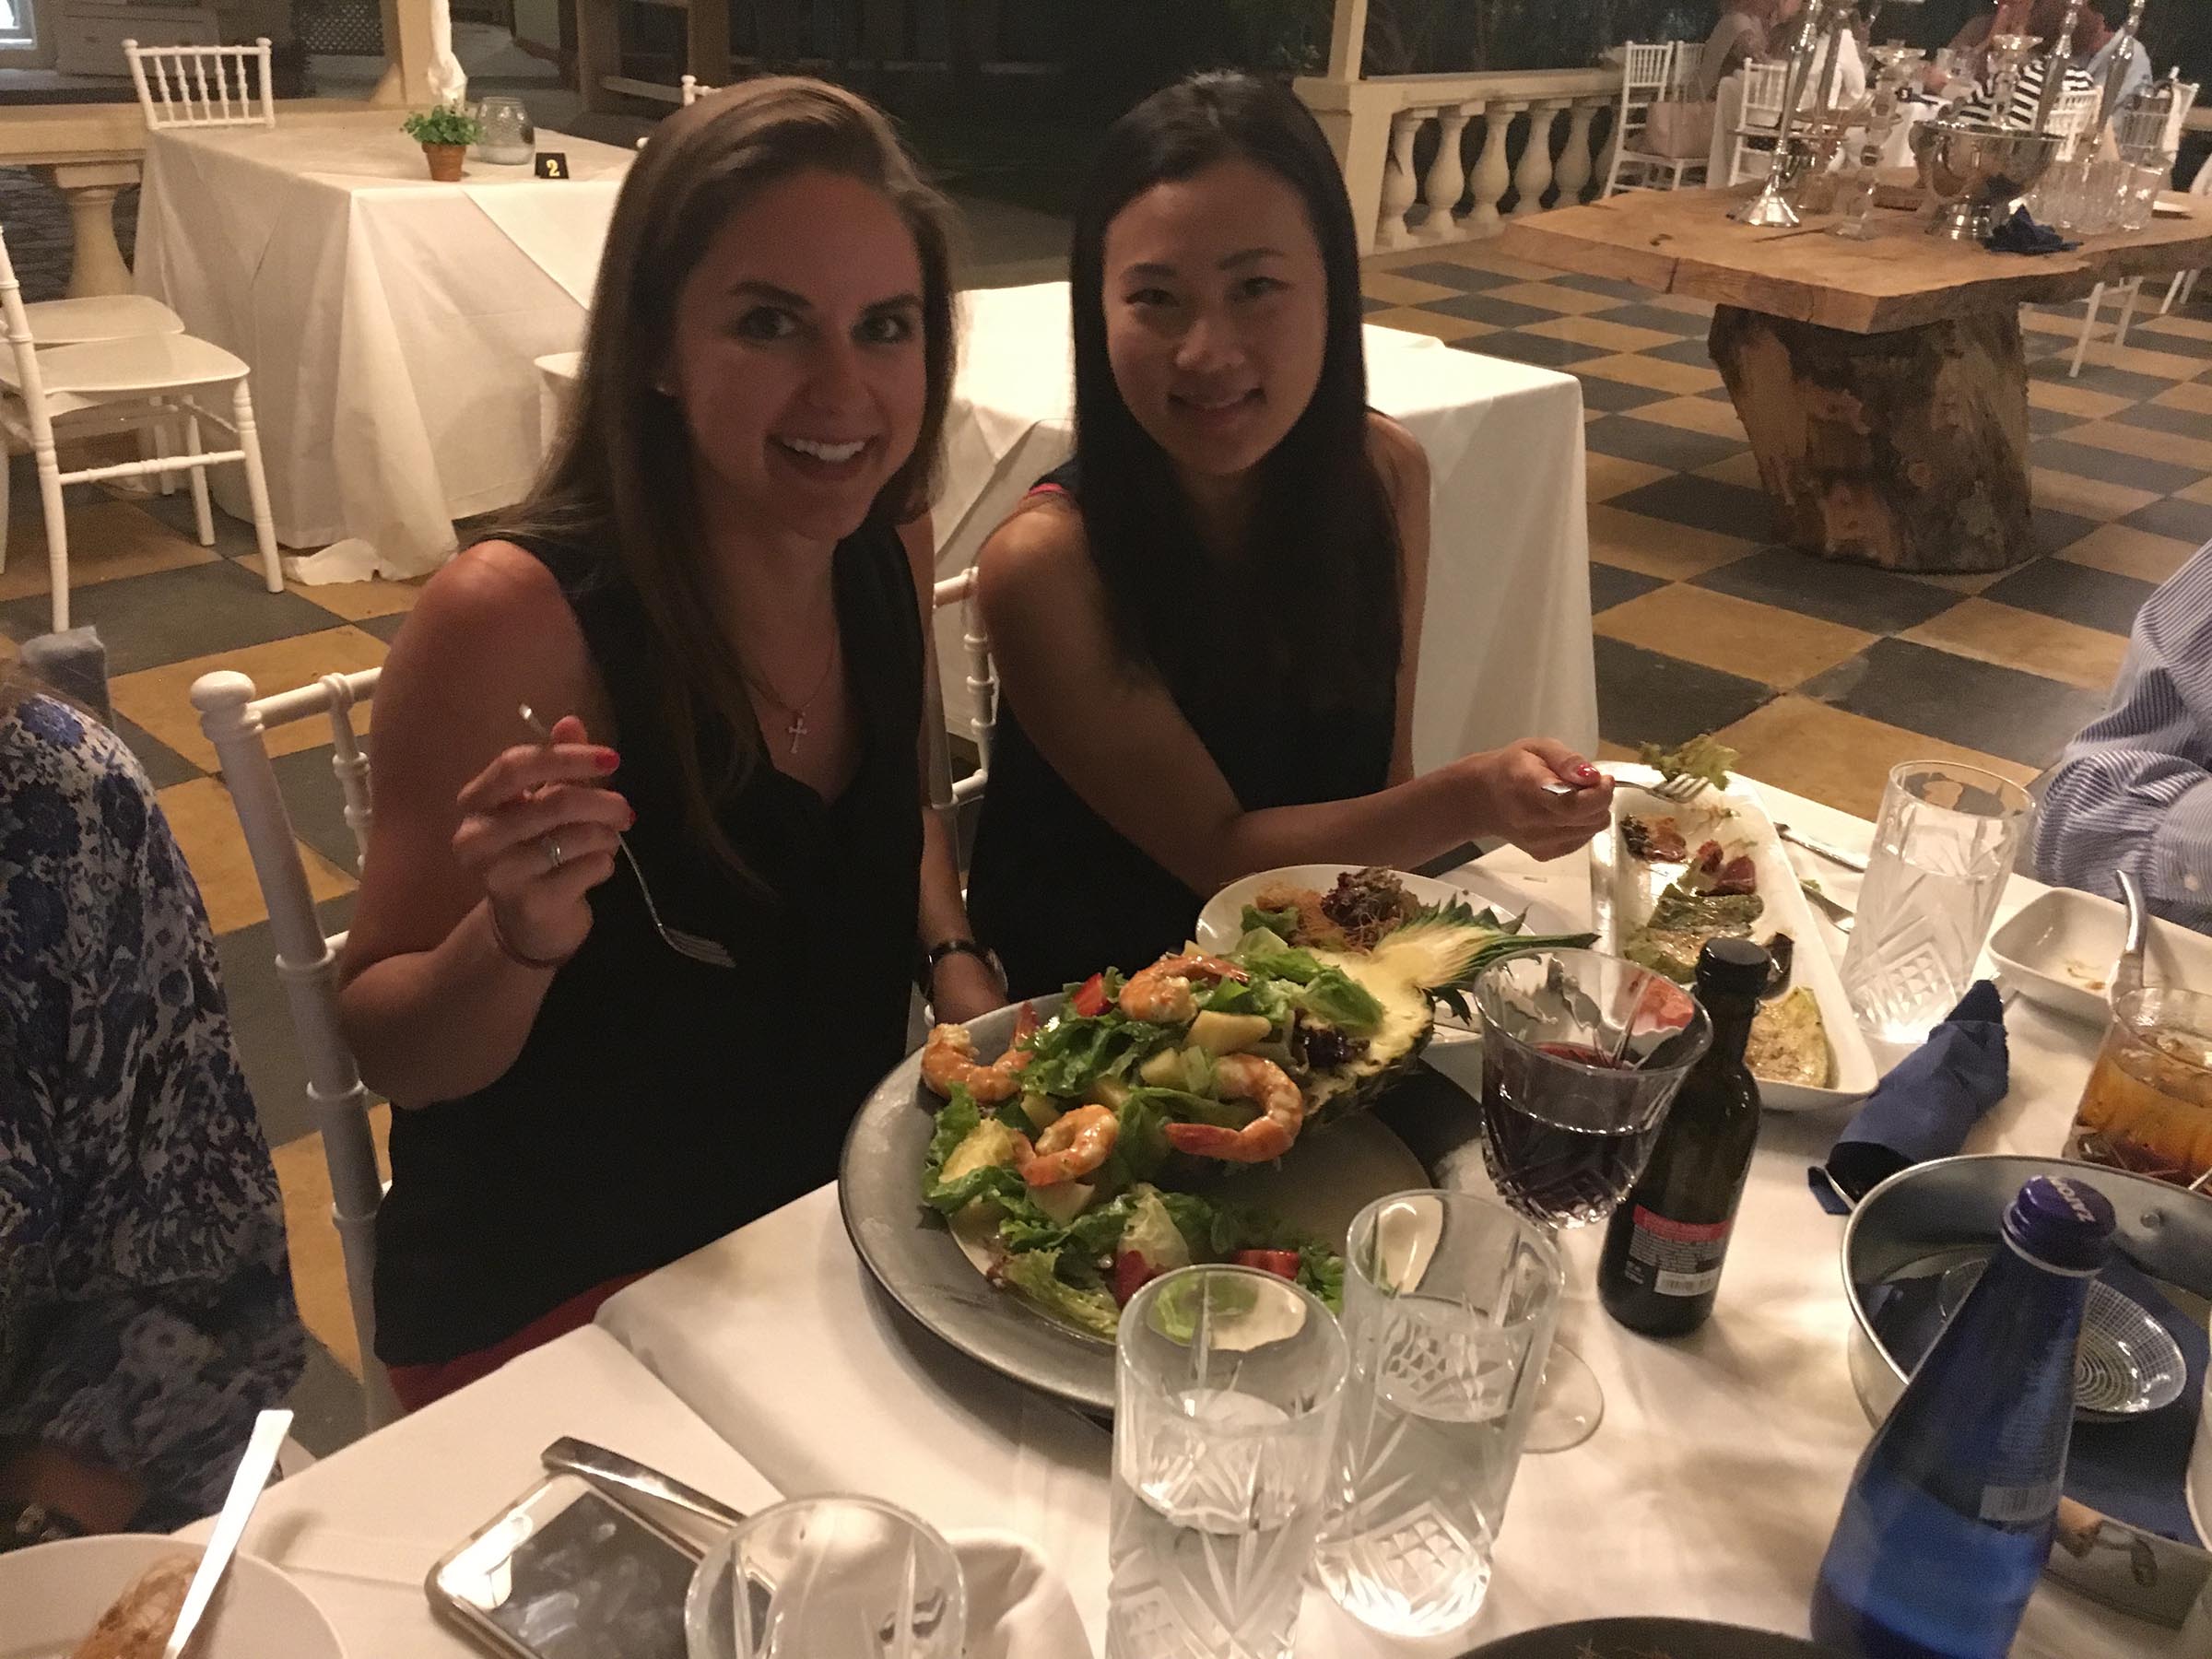 UM Dental Students Kathy Cho and Amanda Robertson enjoying dinner with the group in a Corfu Restaurant